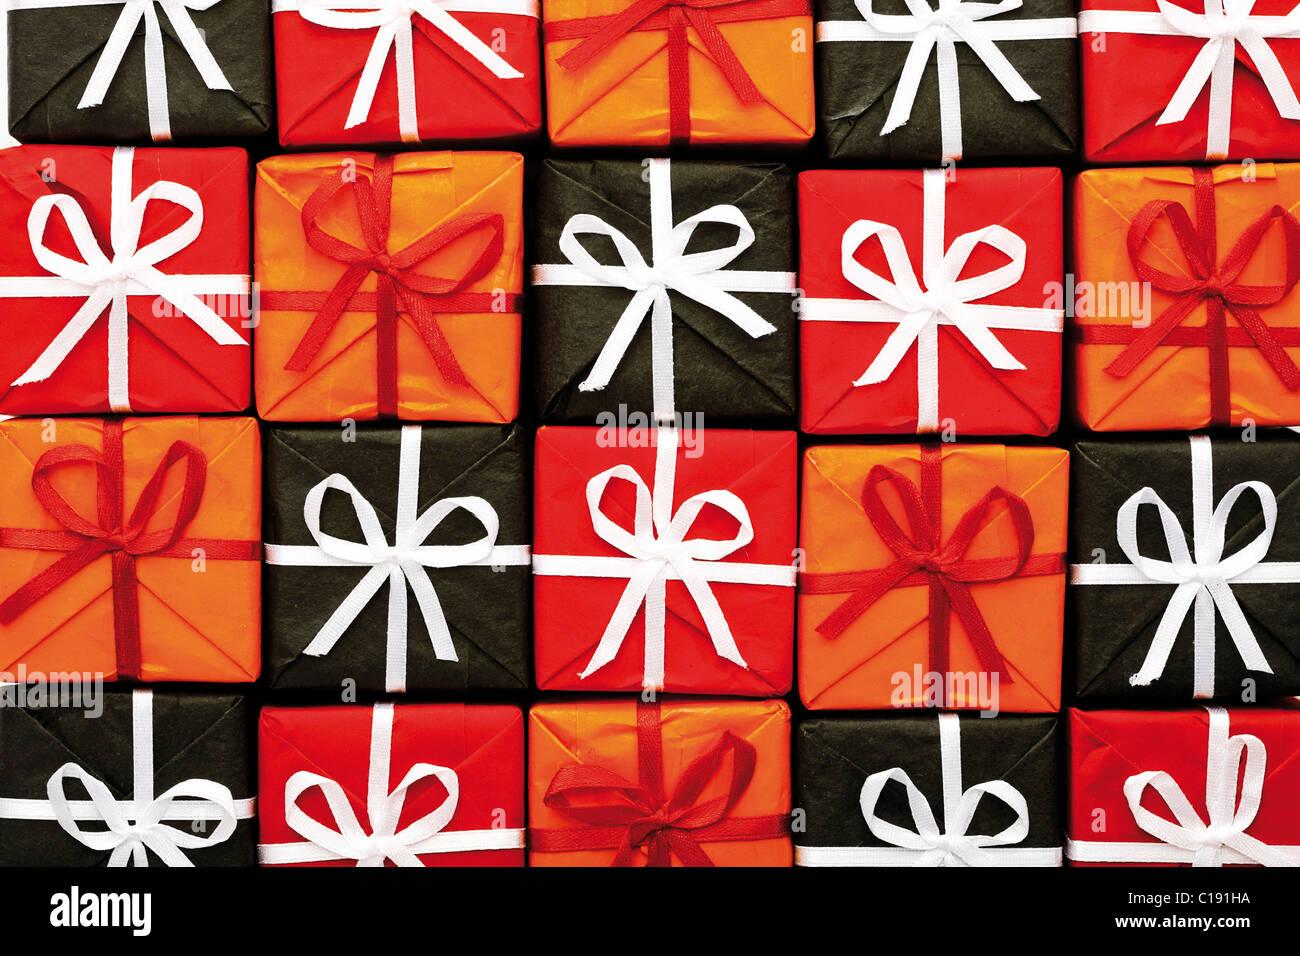 Multitude of gift parcels, presents joined together Stock Photo